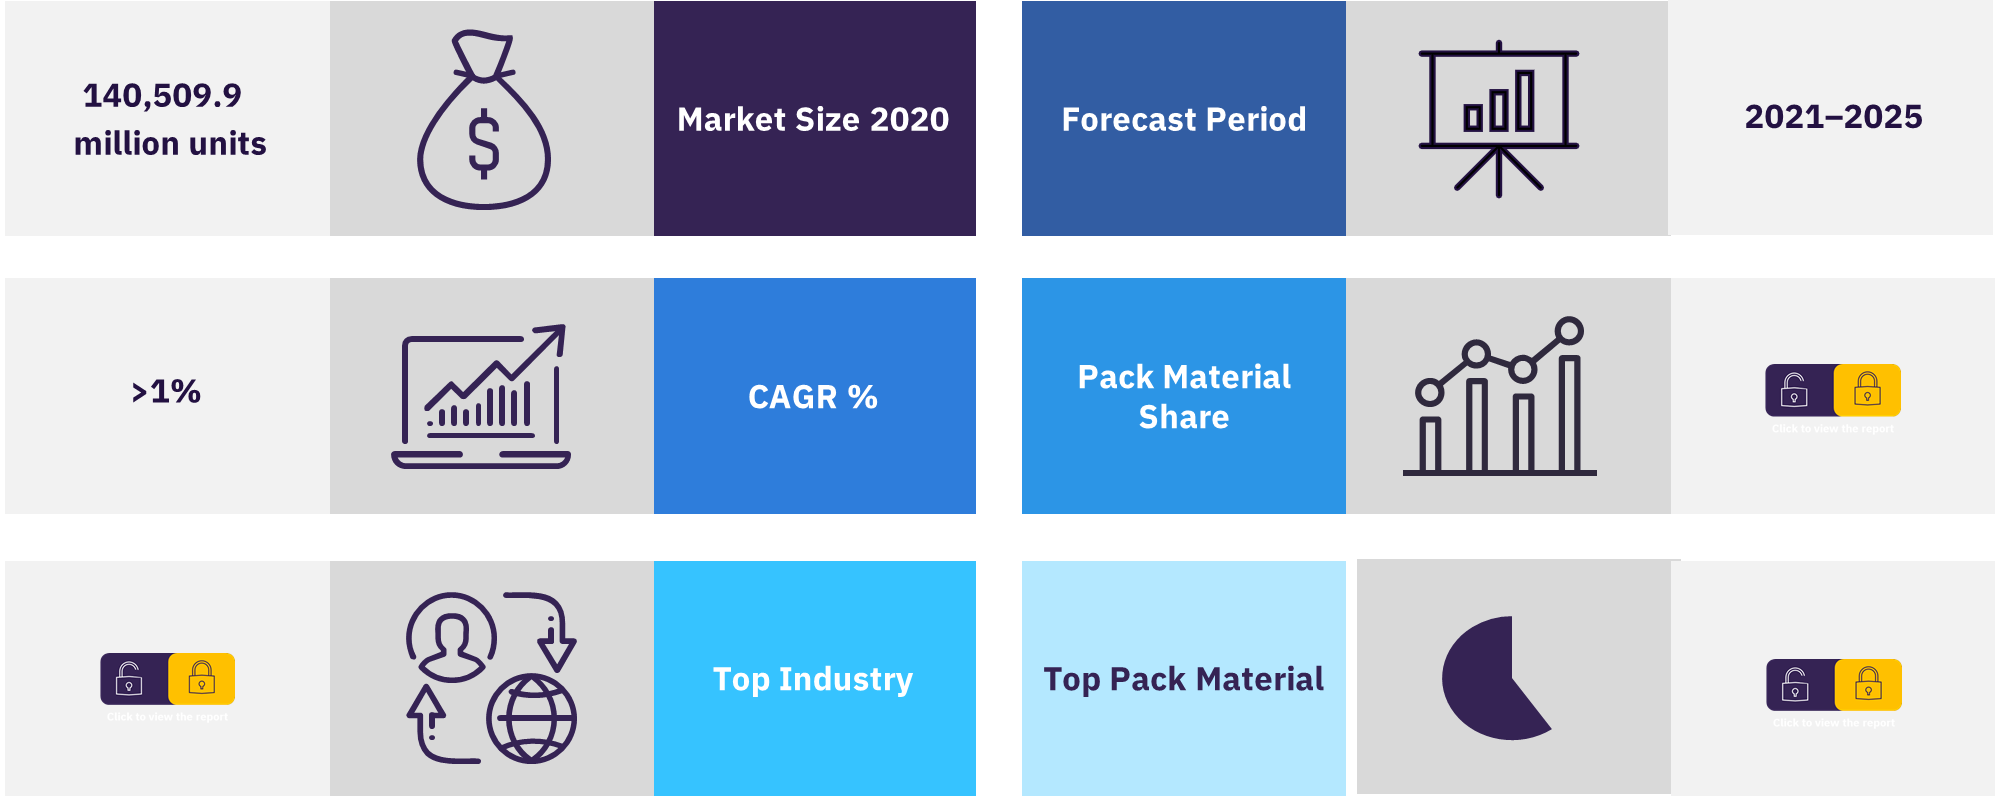 Overview of the packaging market in Russia